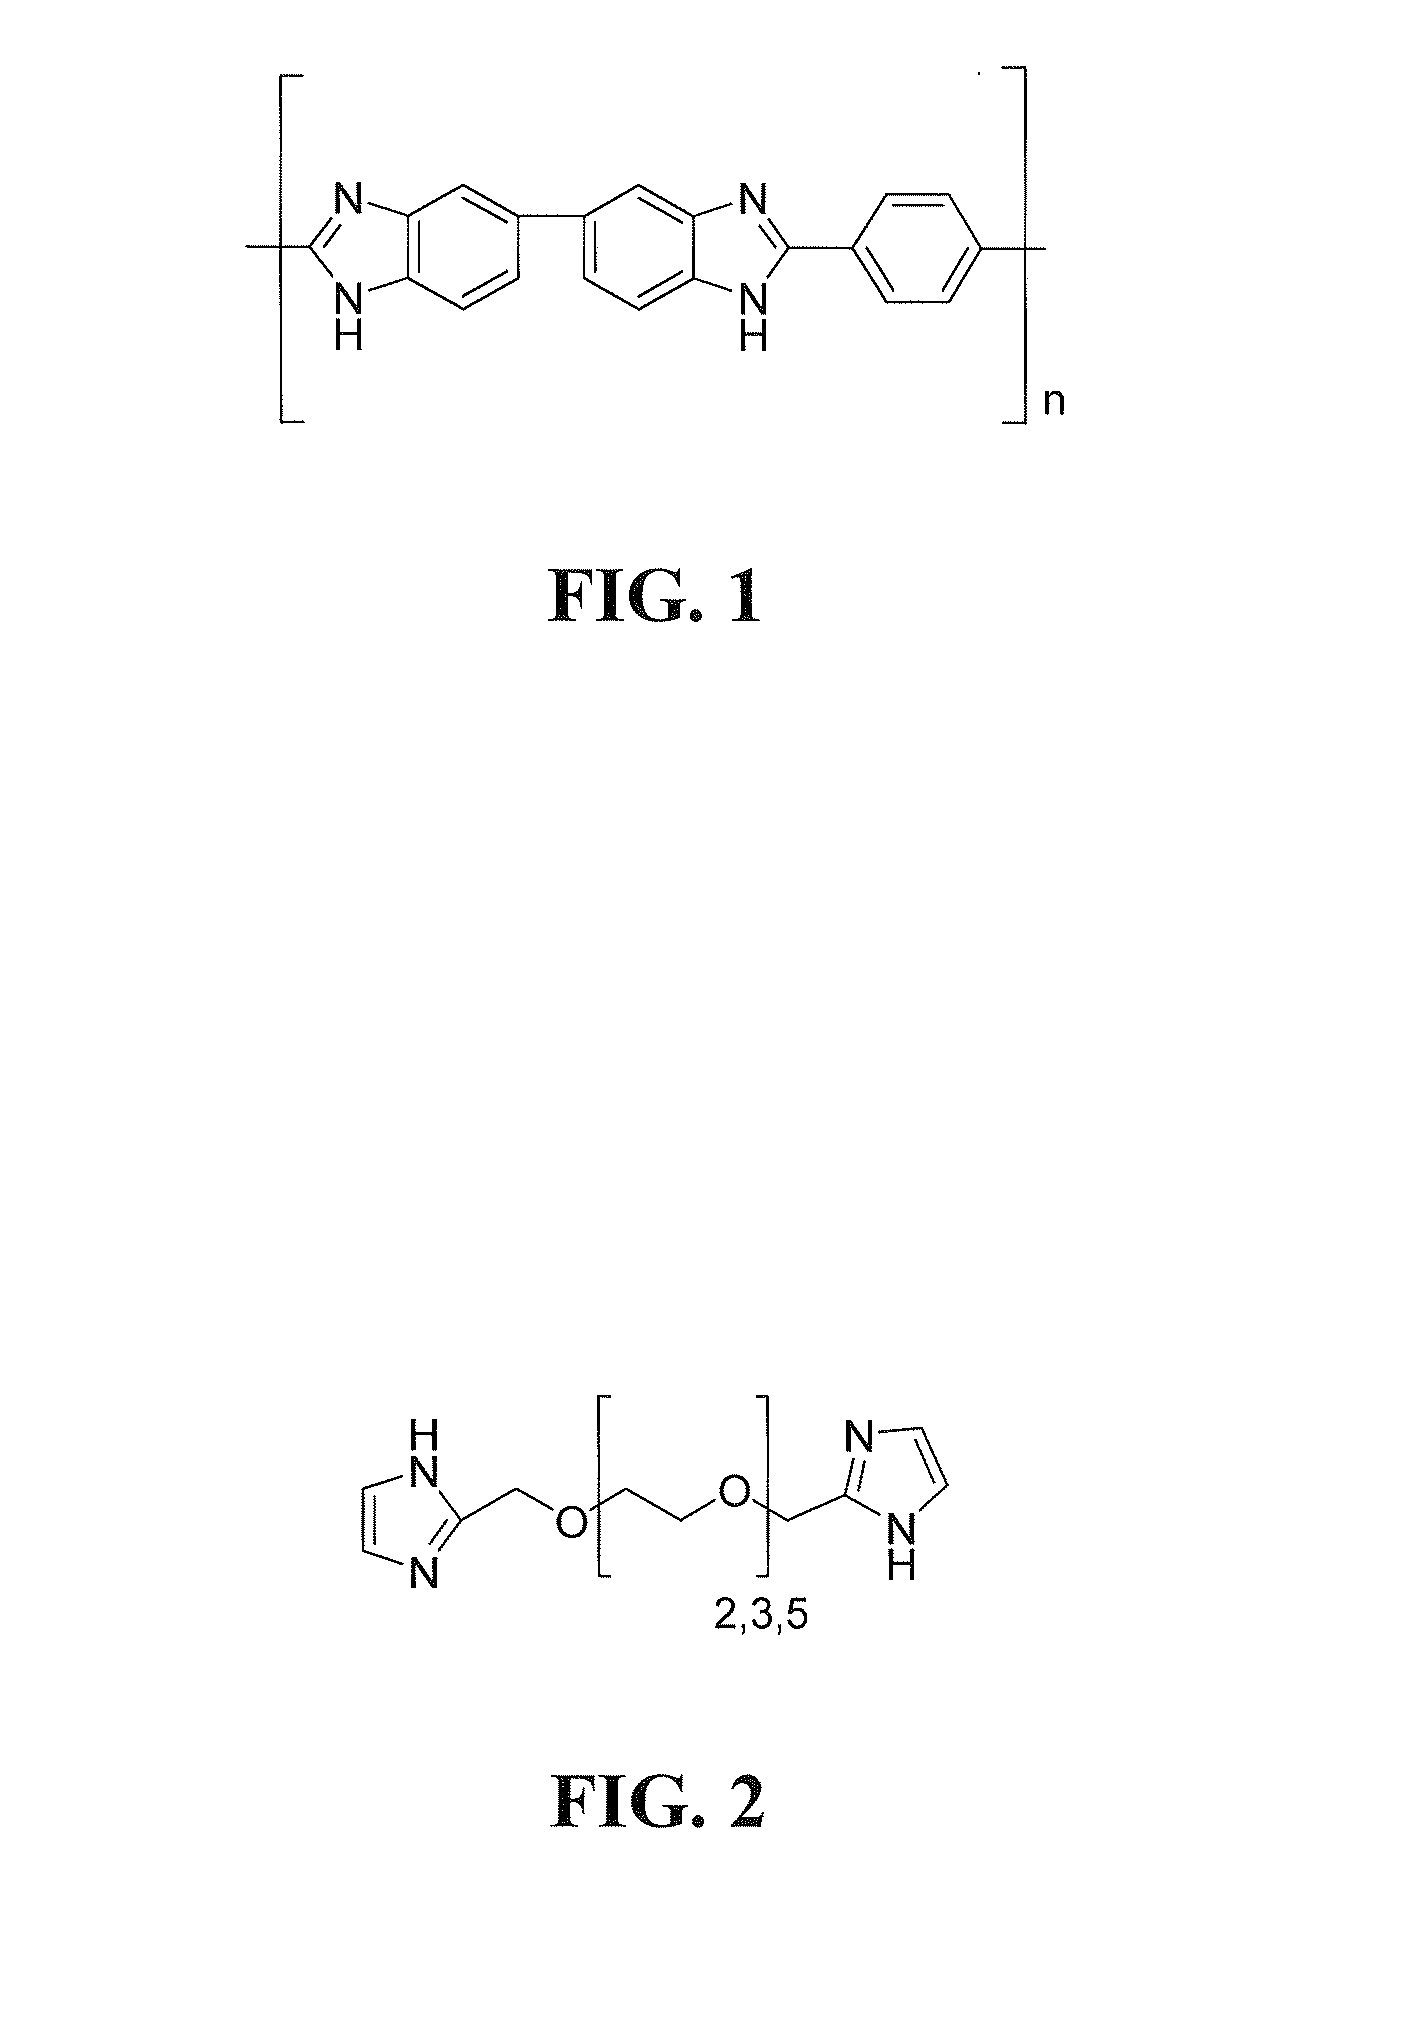 Electrolyte membranes and methods of use